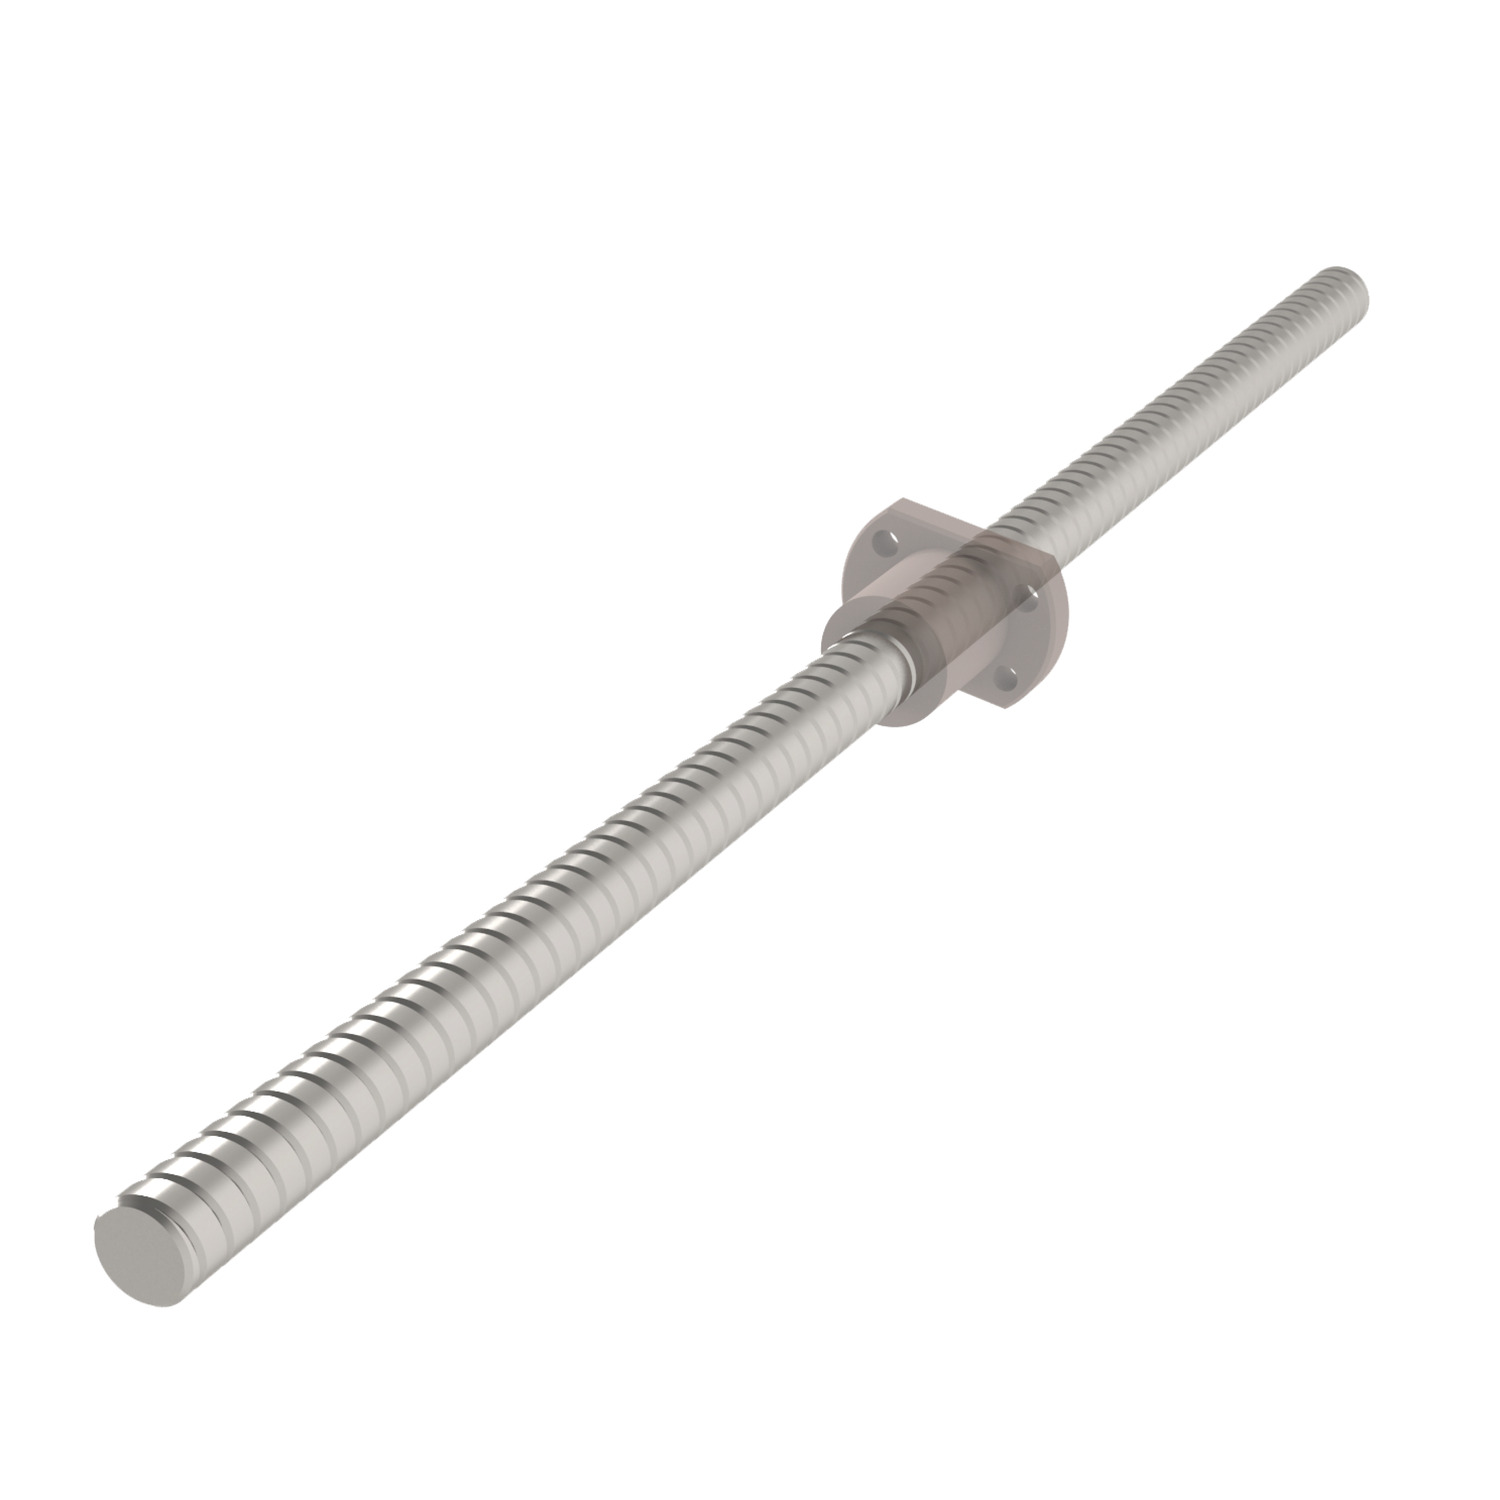 High Helix Lead Screws - Stainless Fully stainless steel (AISI/SUS grade 304; A2) high helix lead screws, for applications where corrosion resistance is a priority.